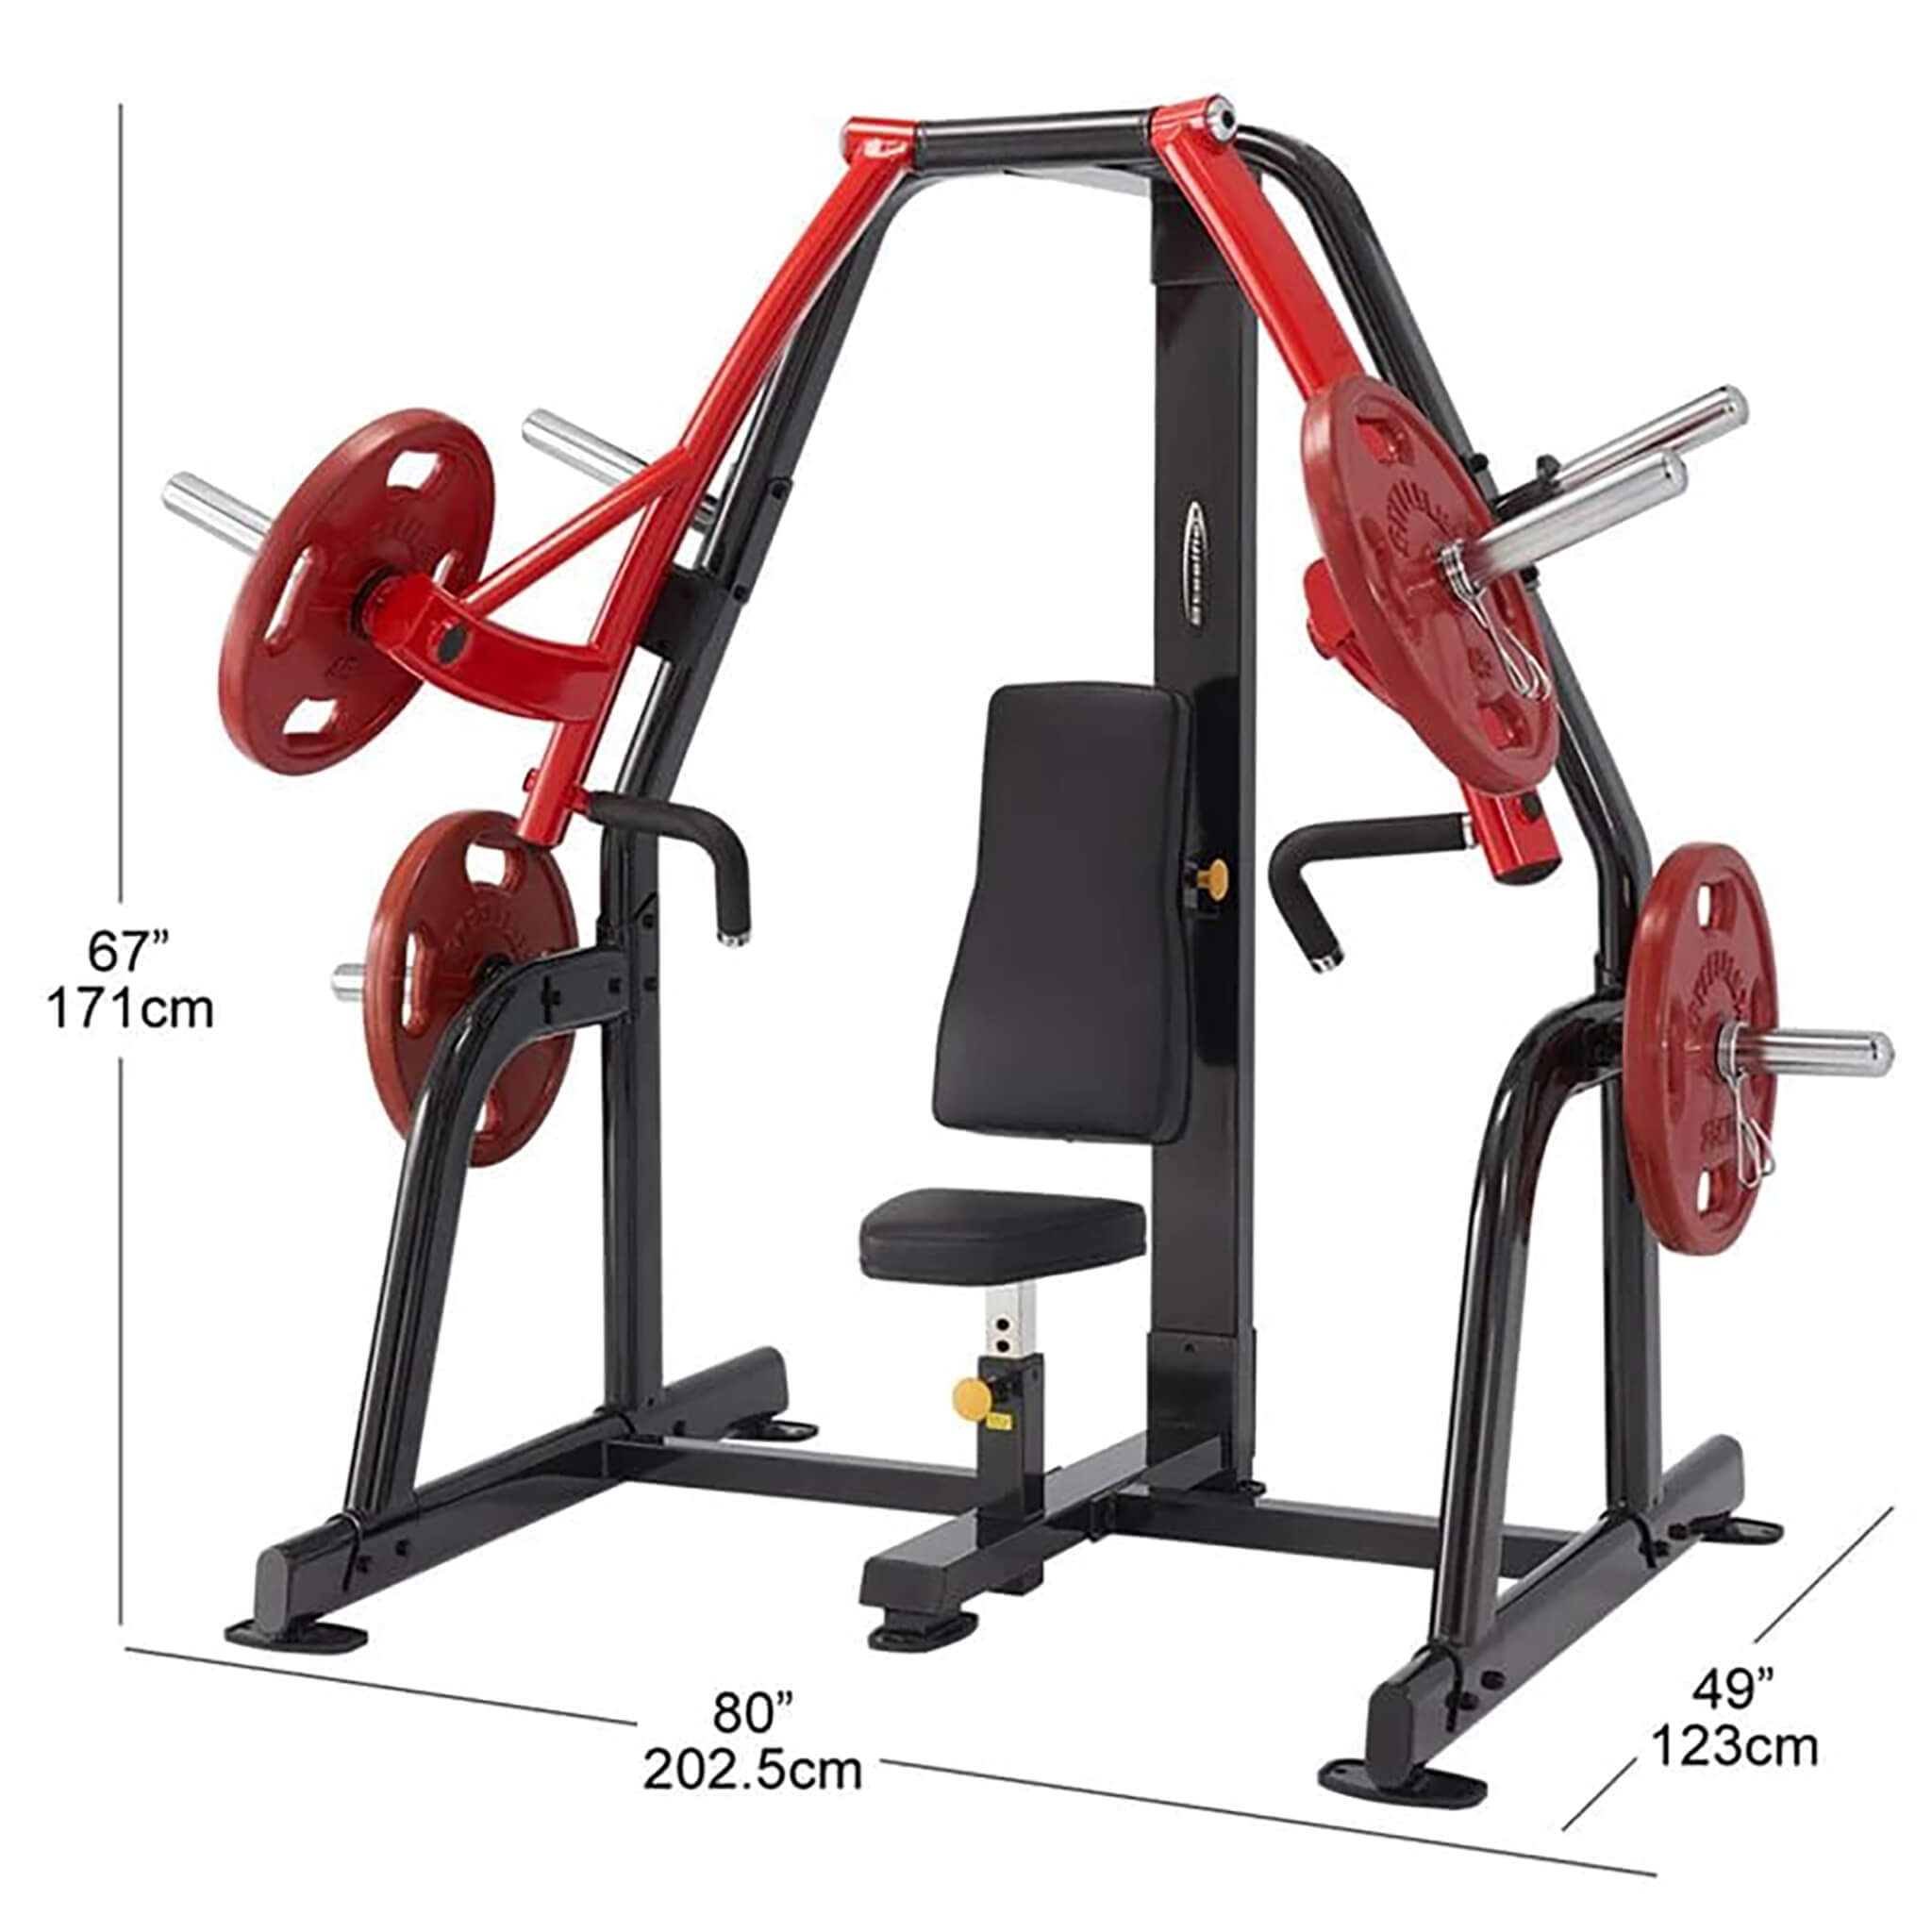 psbp plate loaded bench press machine dimensions